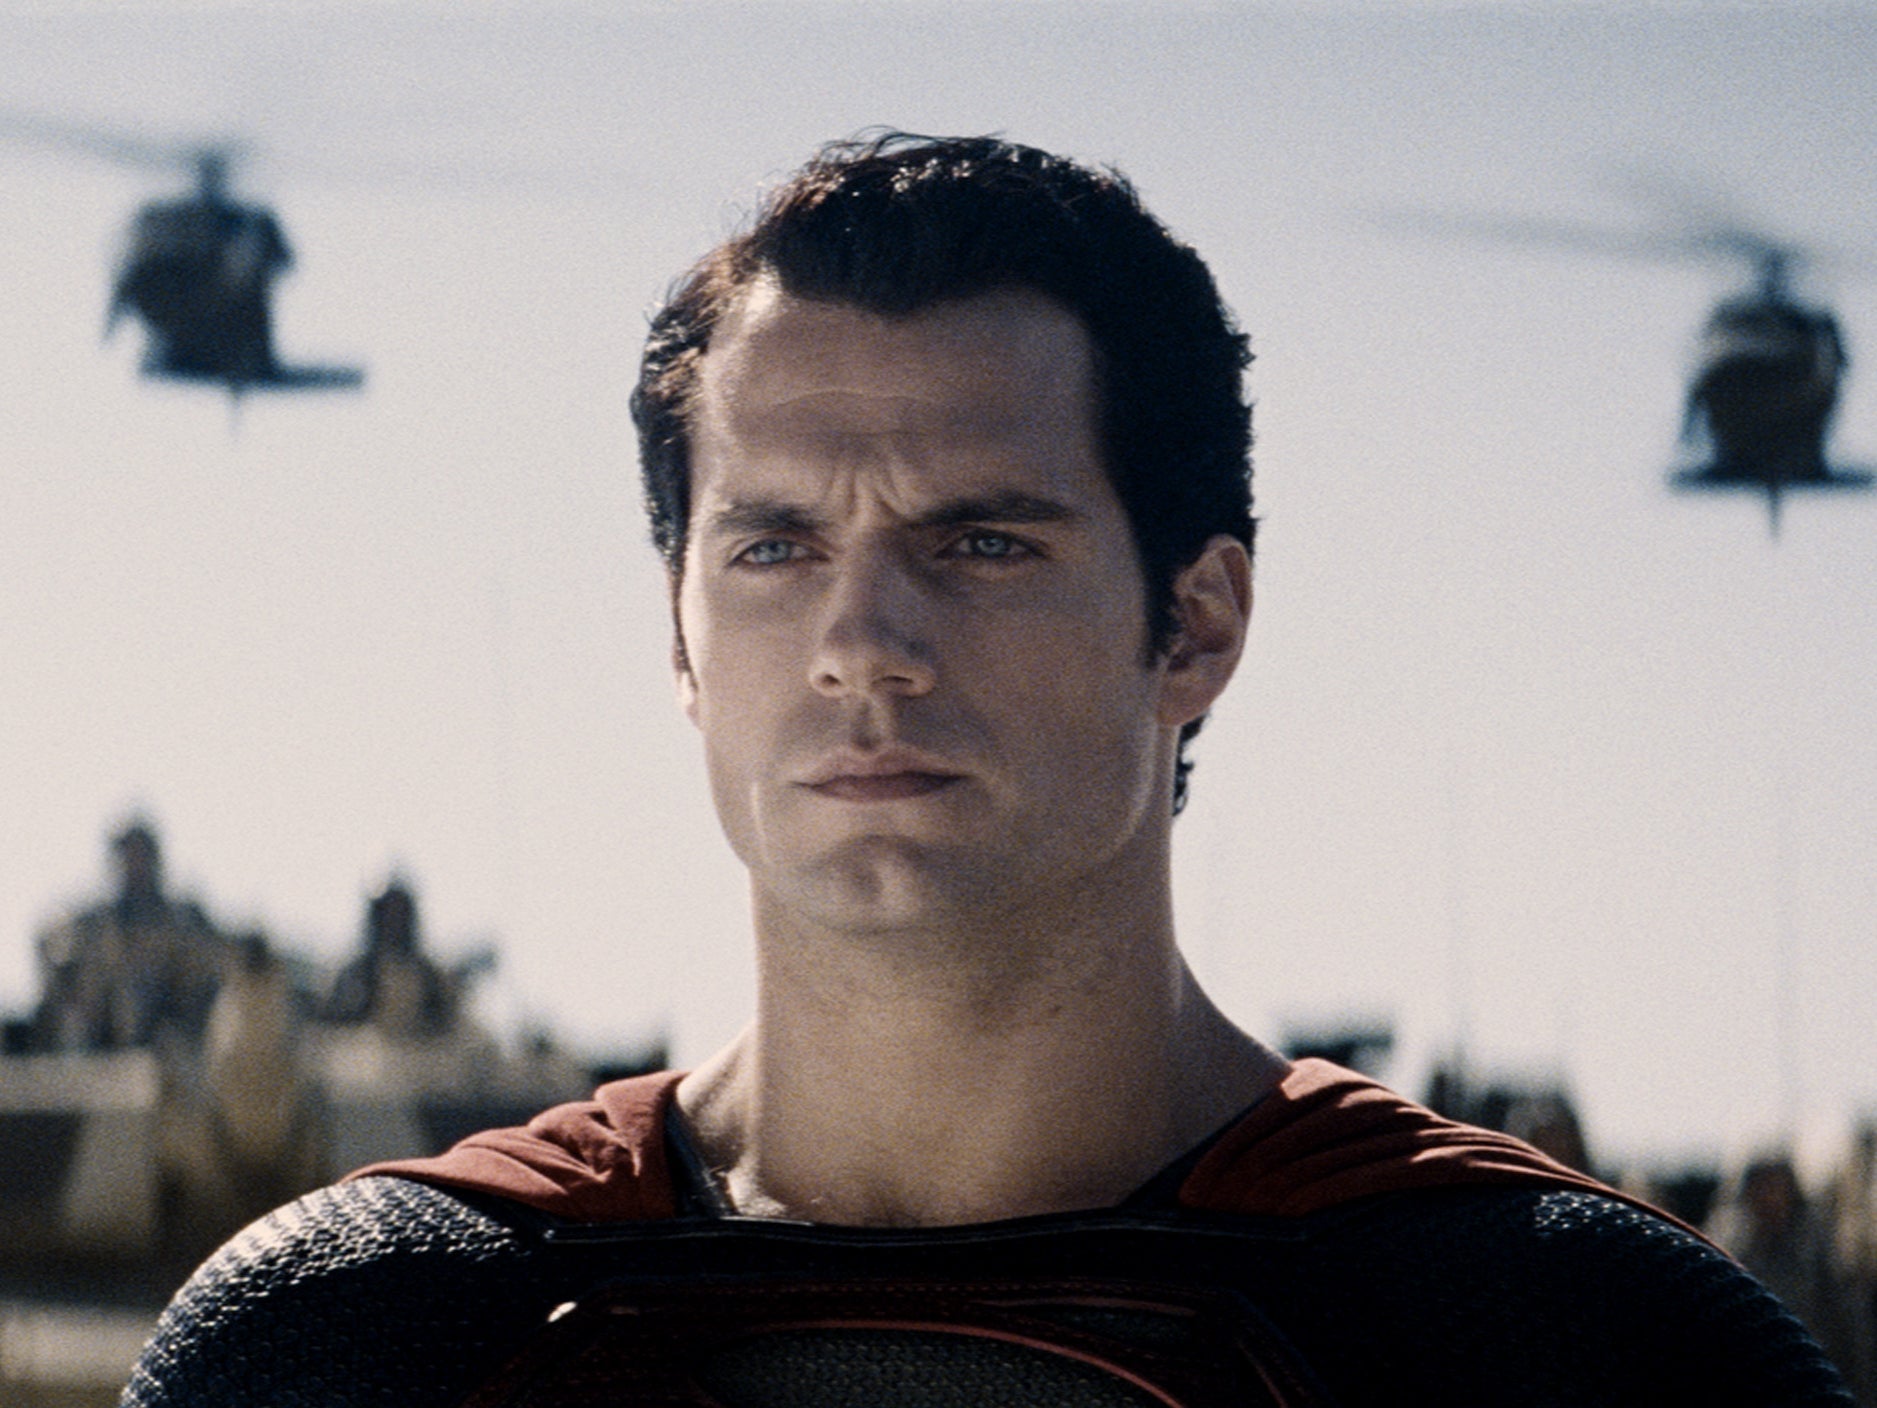 Henry Cavill is out as Superman – but he shouldn’t be too downbeat about it